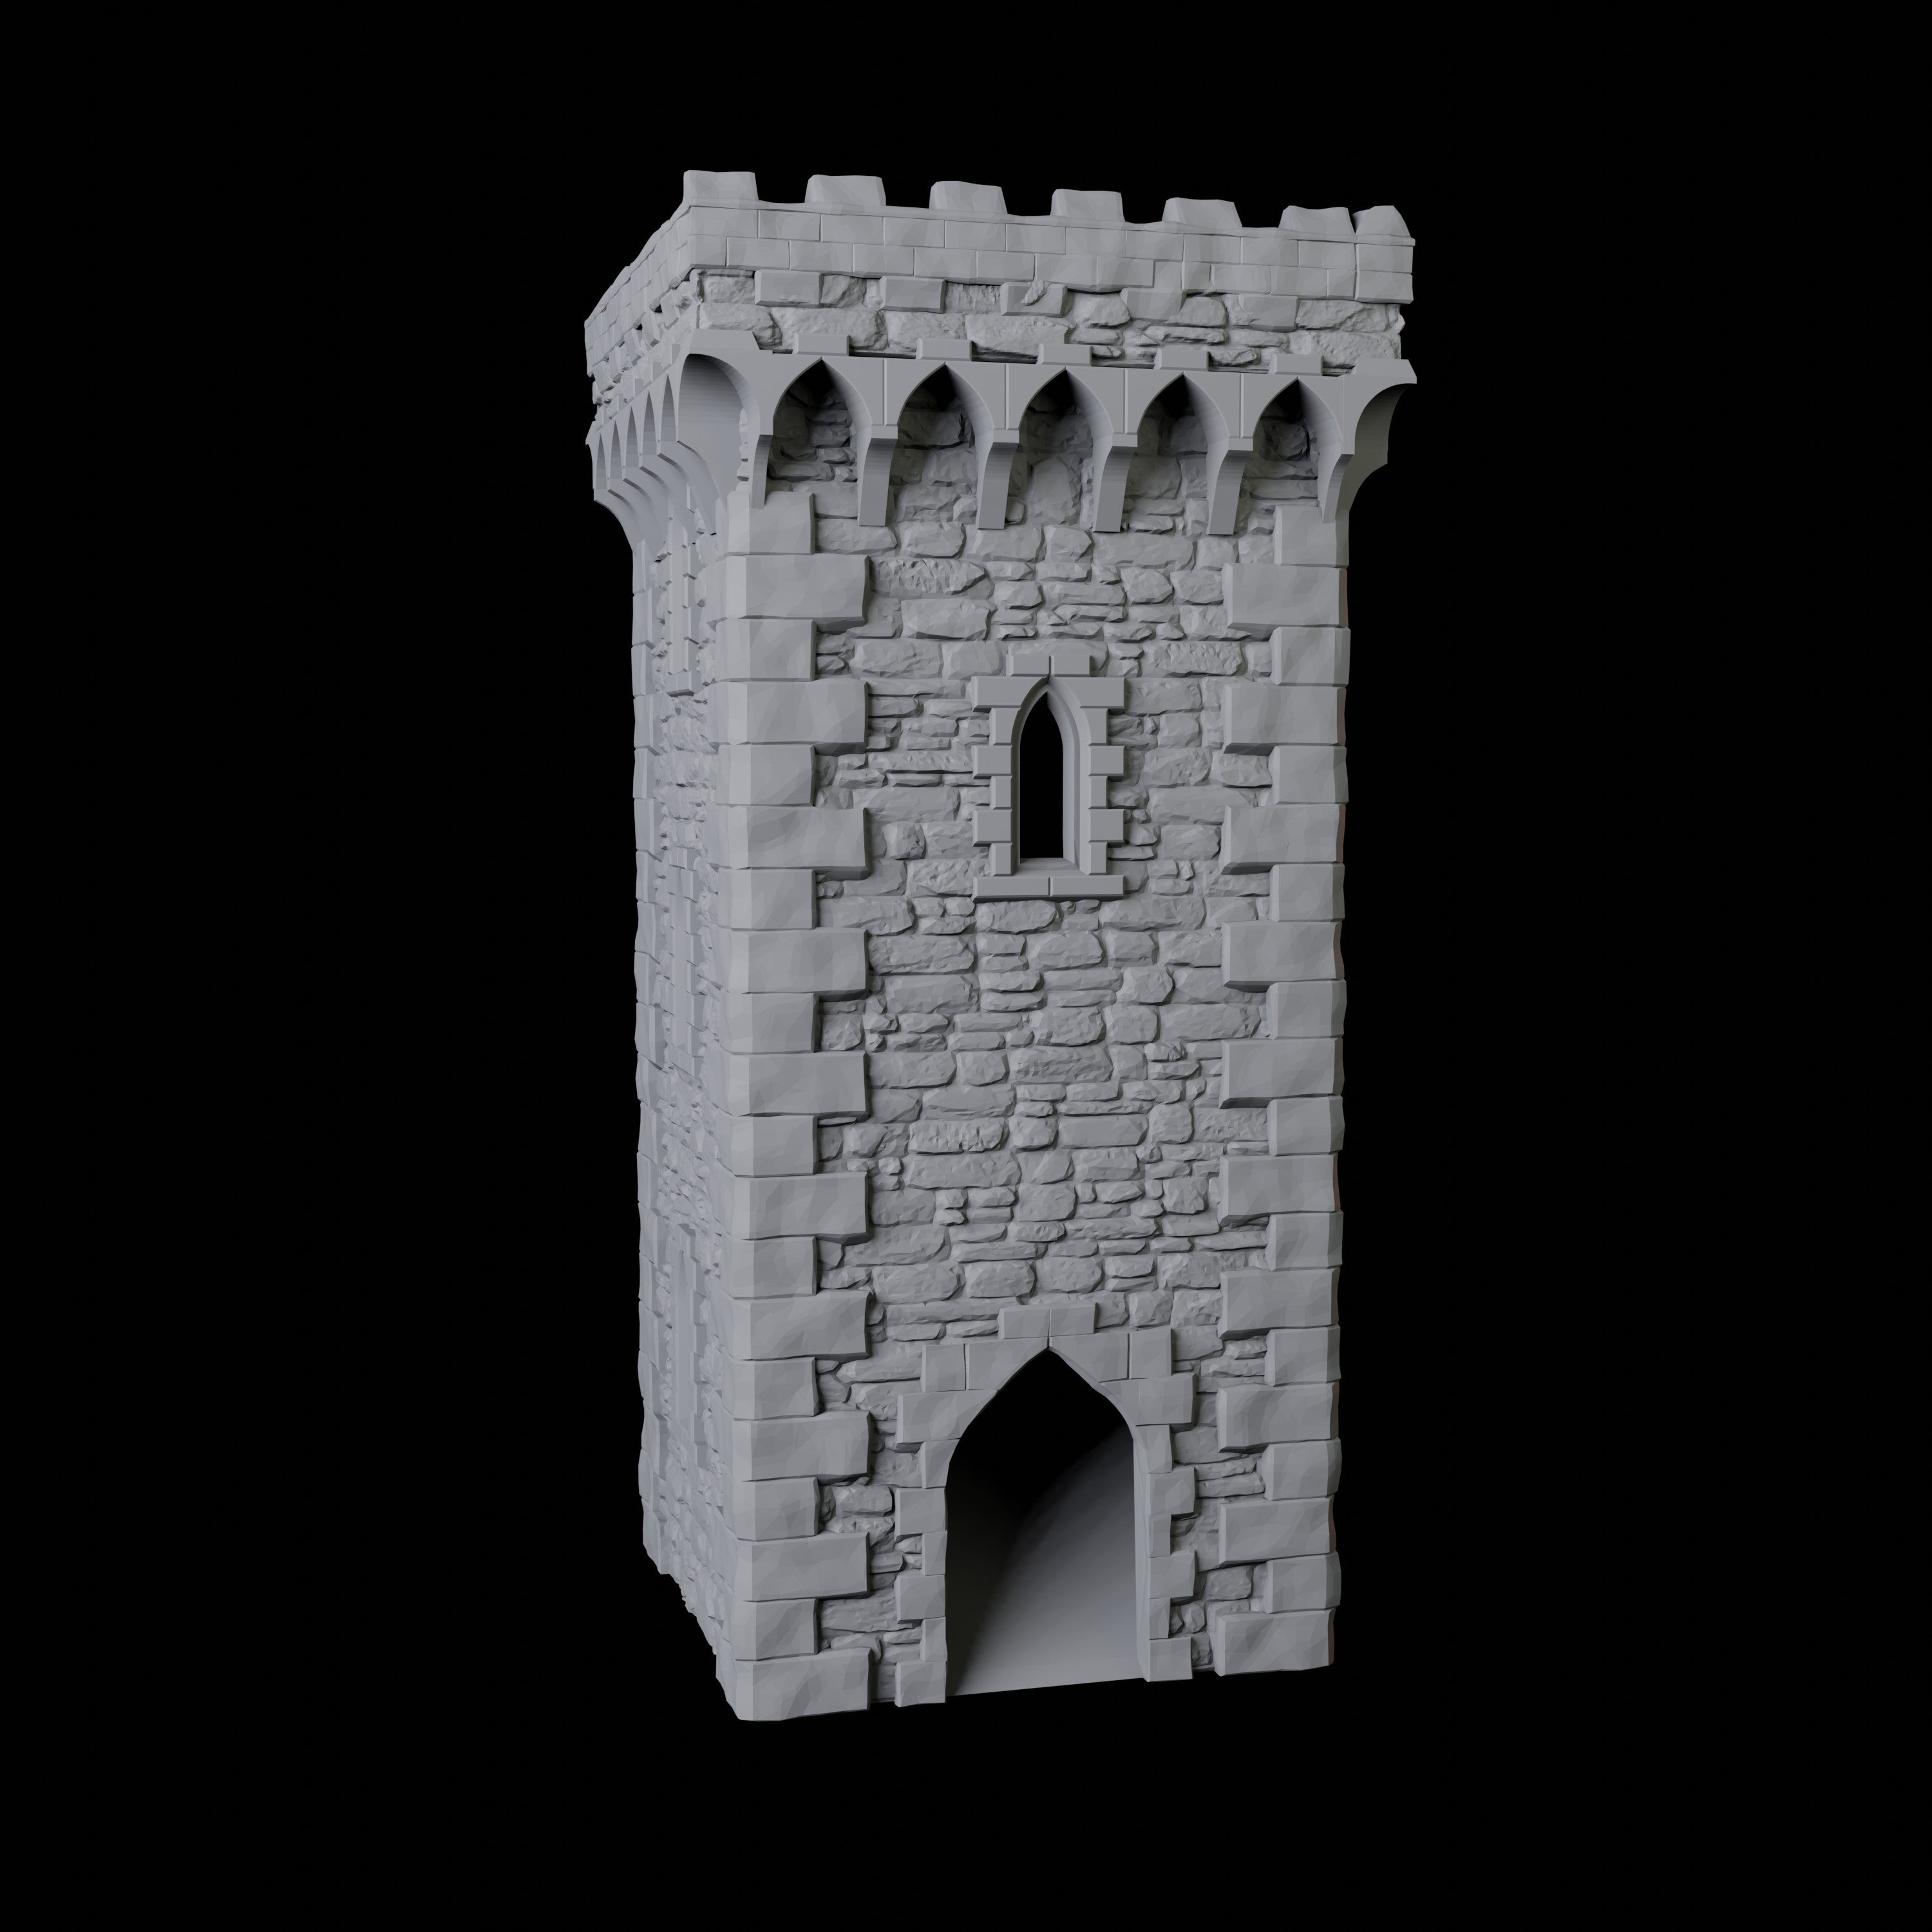 English Castle Dice Tower Miniature for Dungeons and Dragons